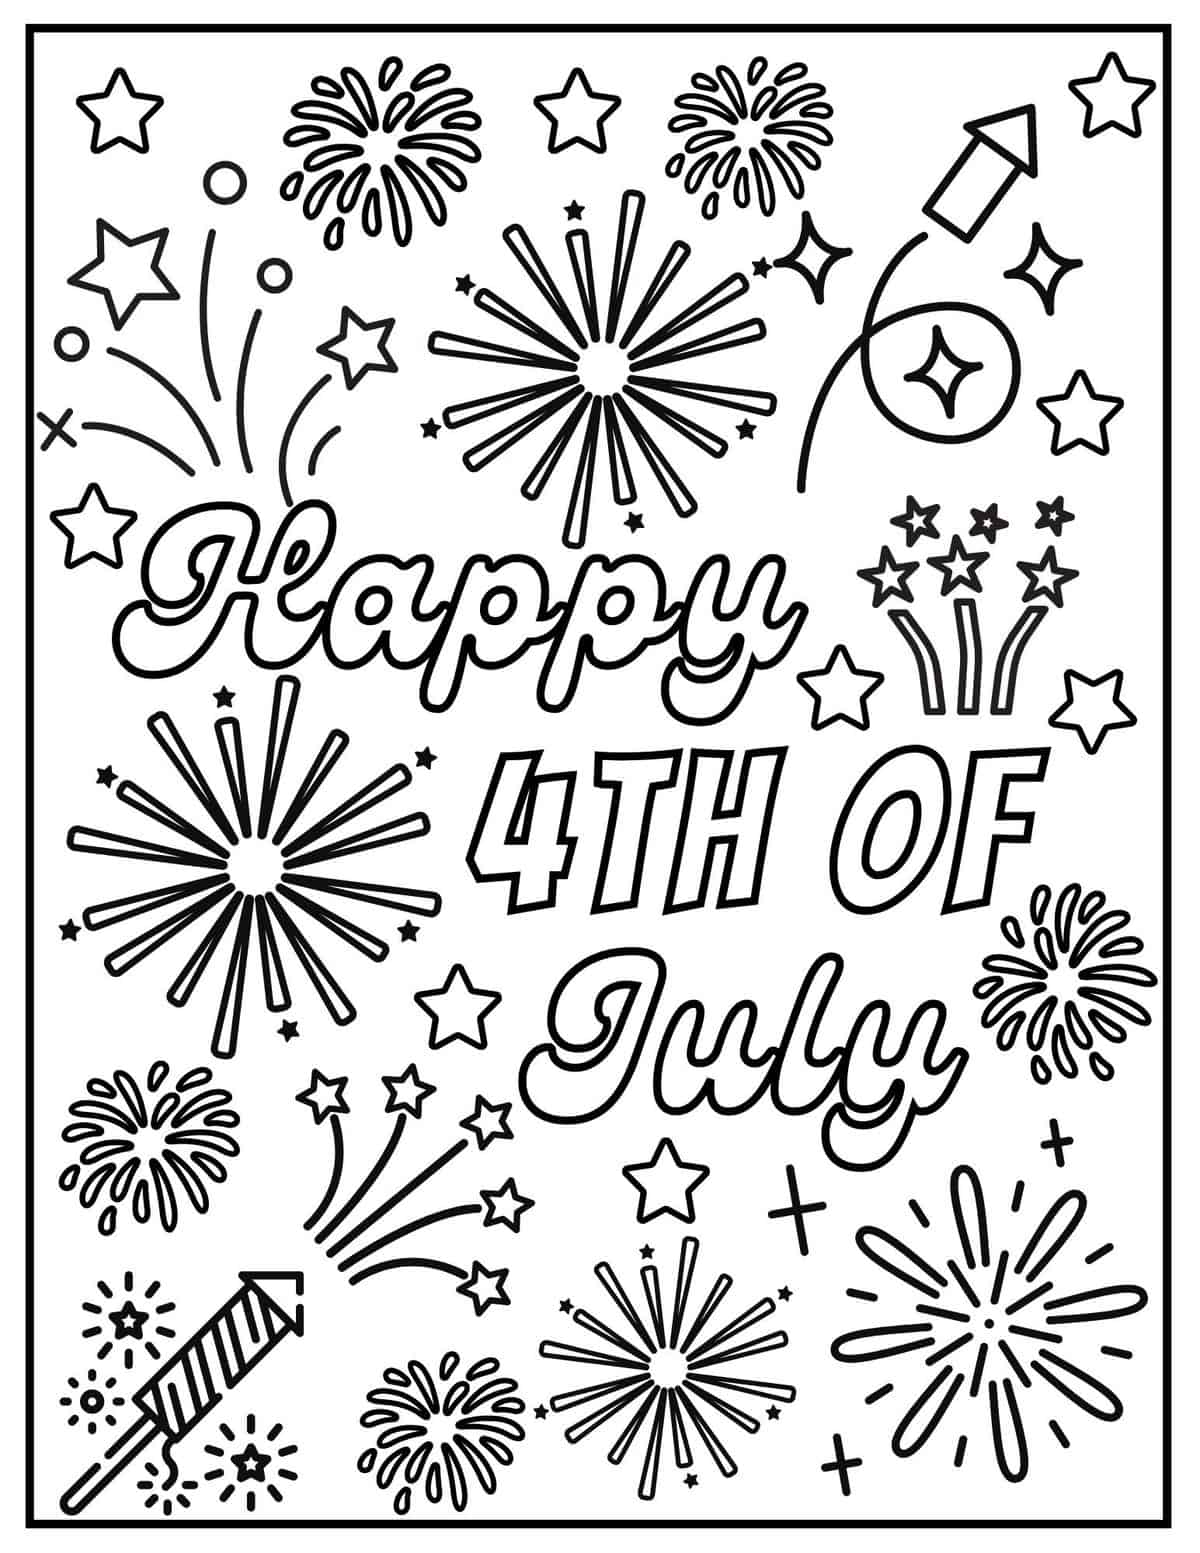 Free th of july coloring pages